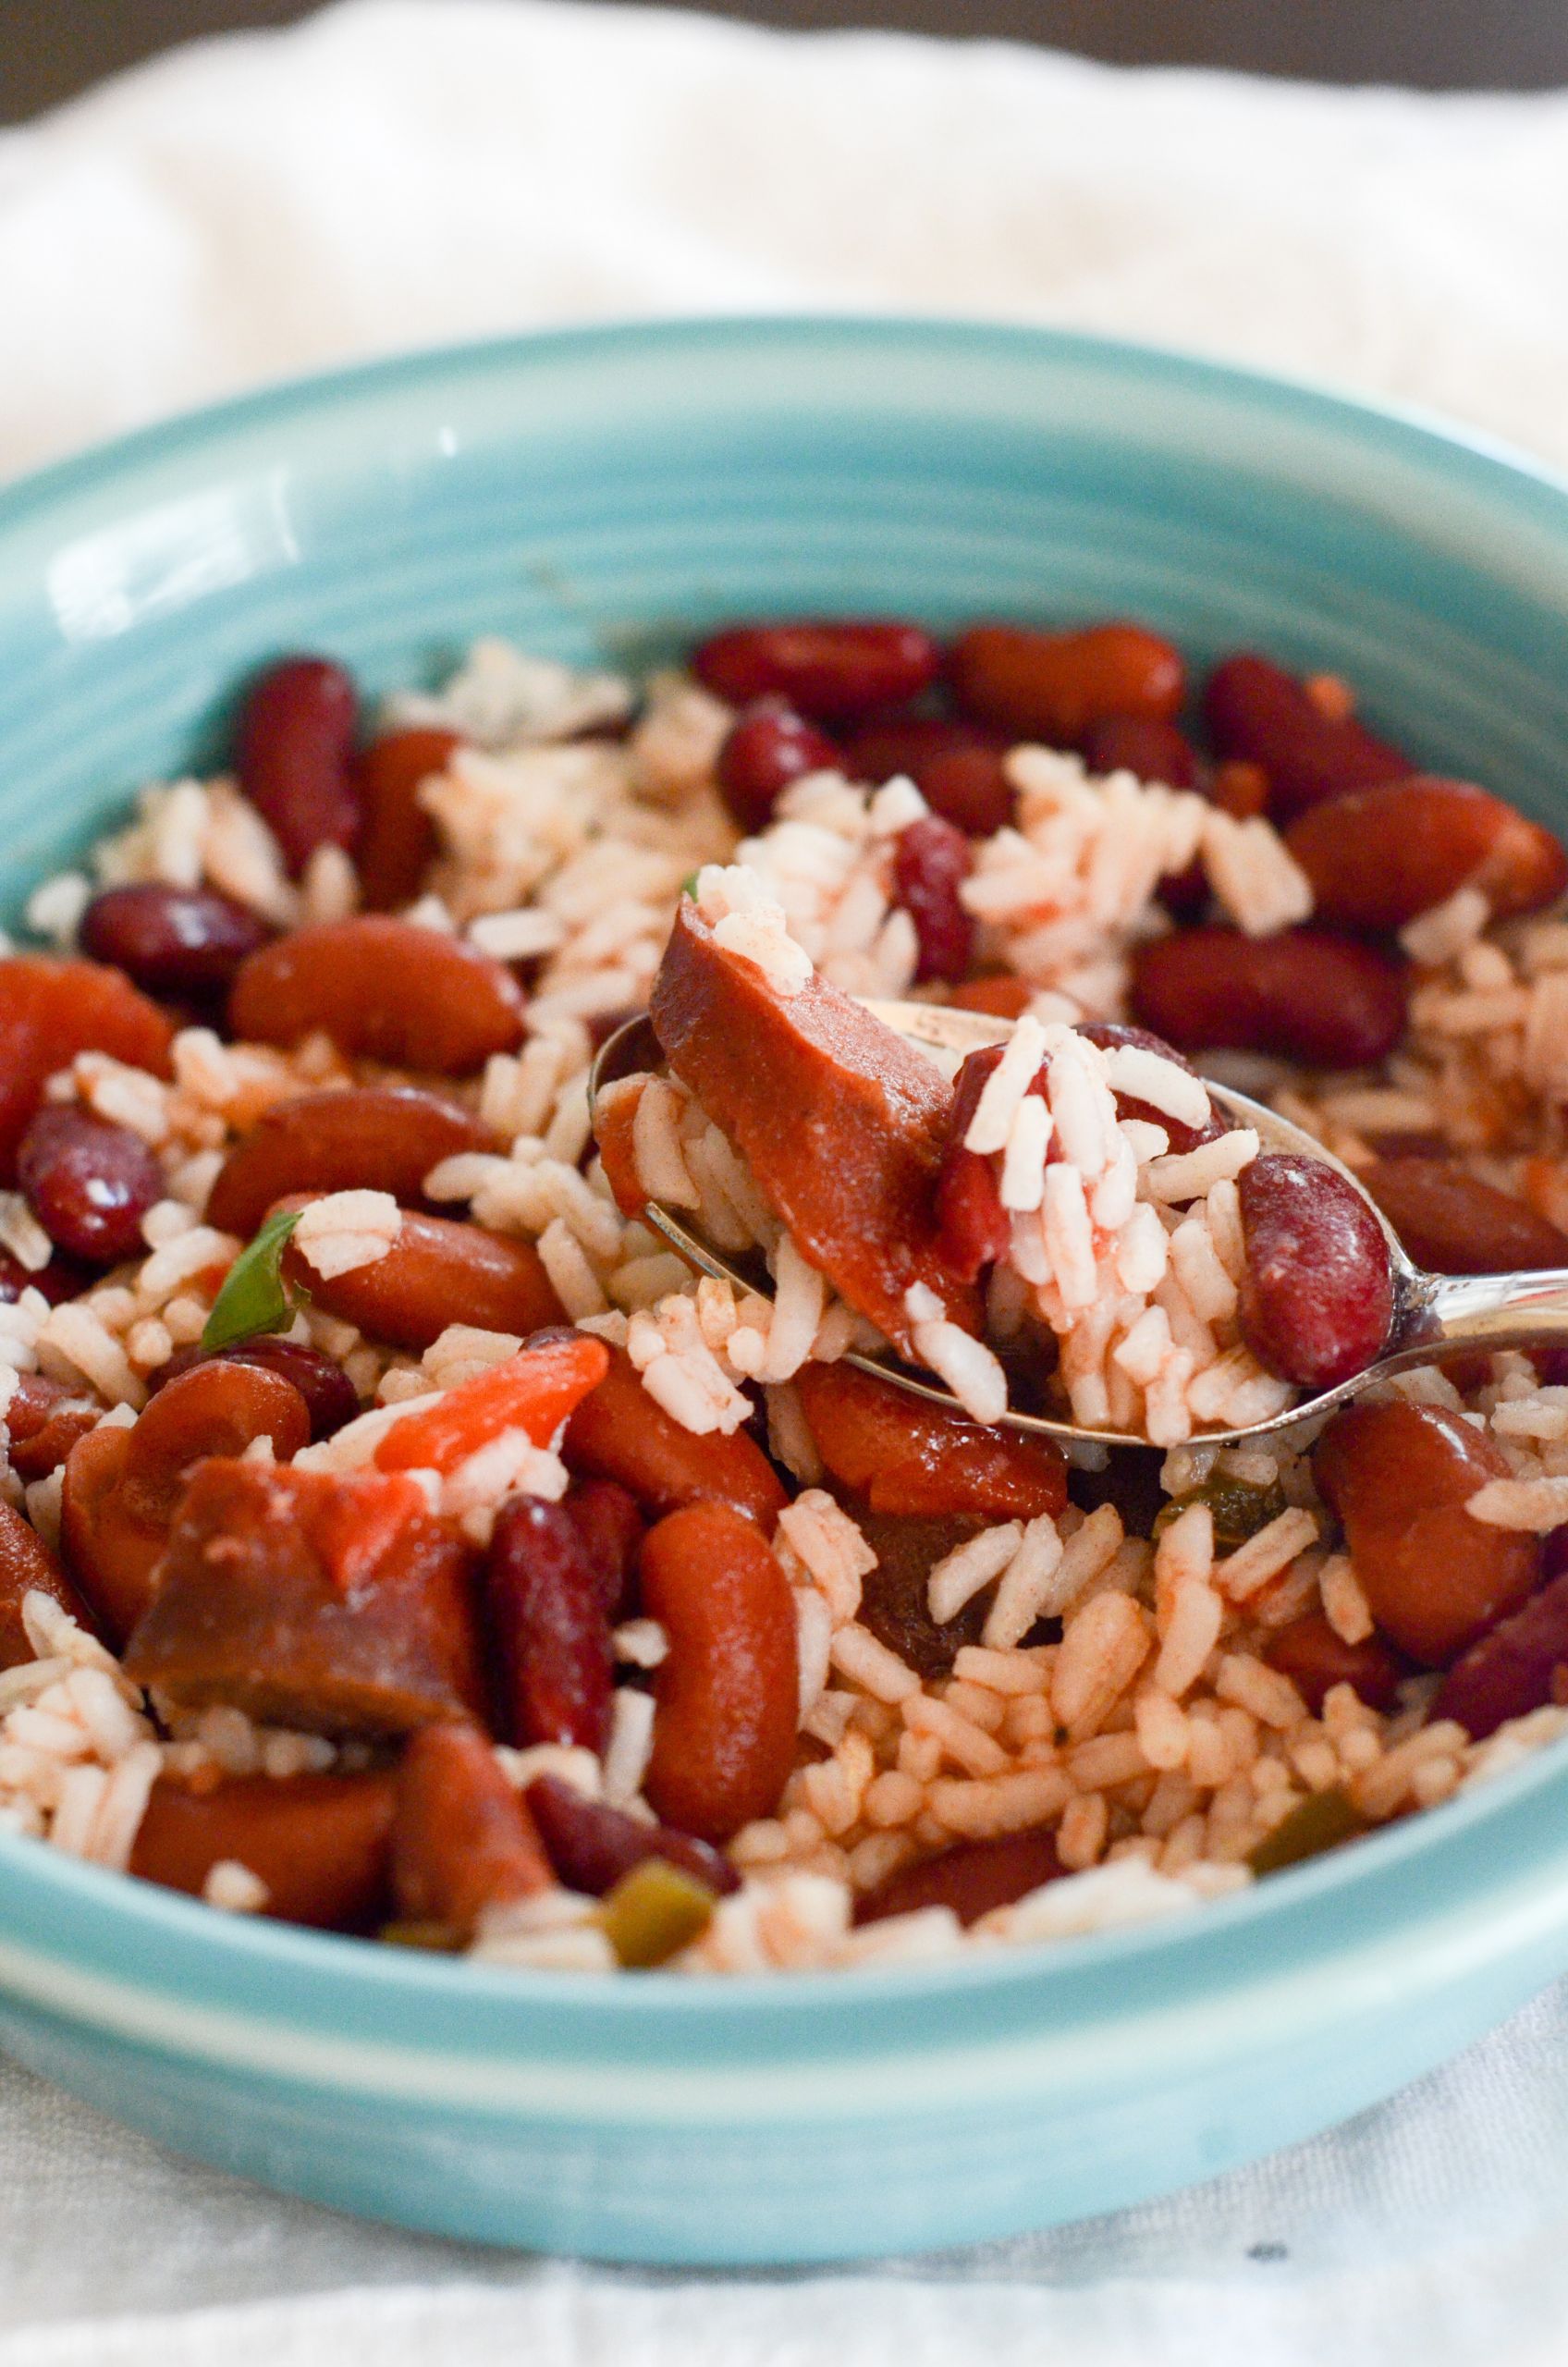 Red Beans And Rice With Canned Beans
 Crock Pot Red Beans and Rice with Canned Beans and Smoked